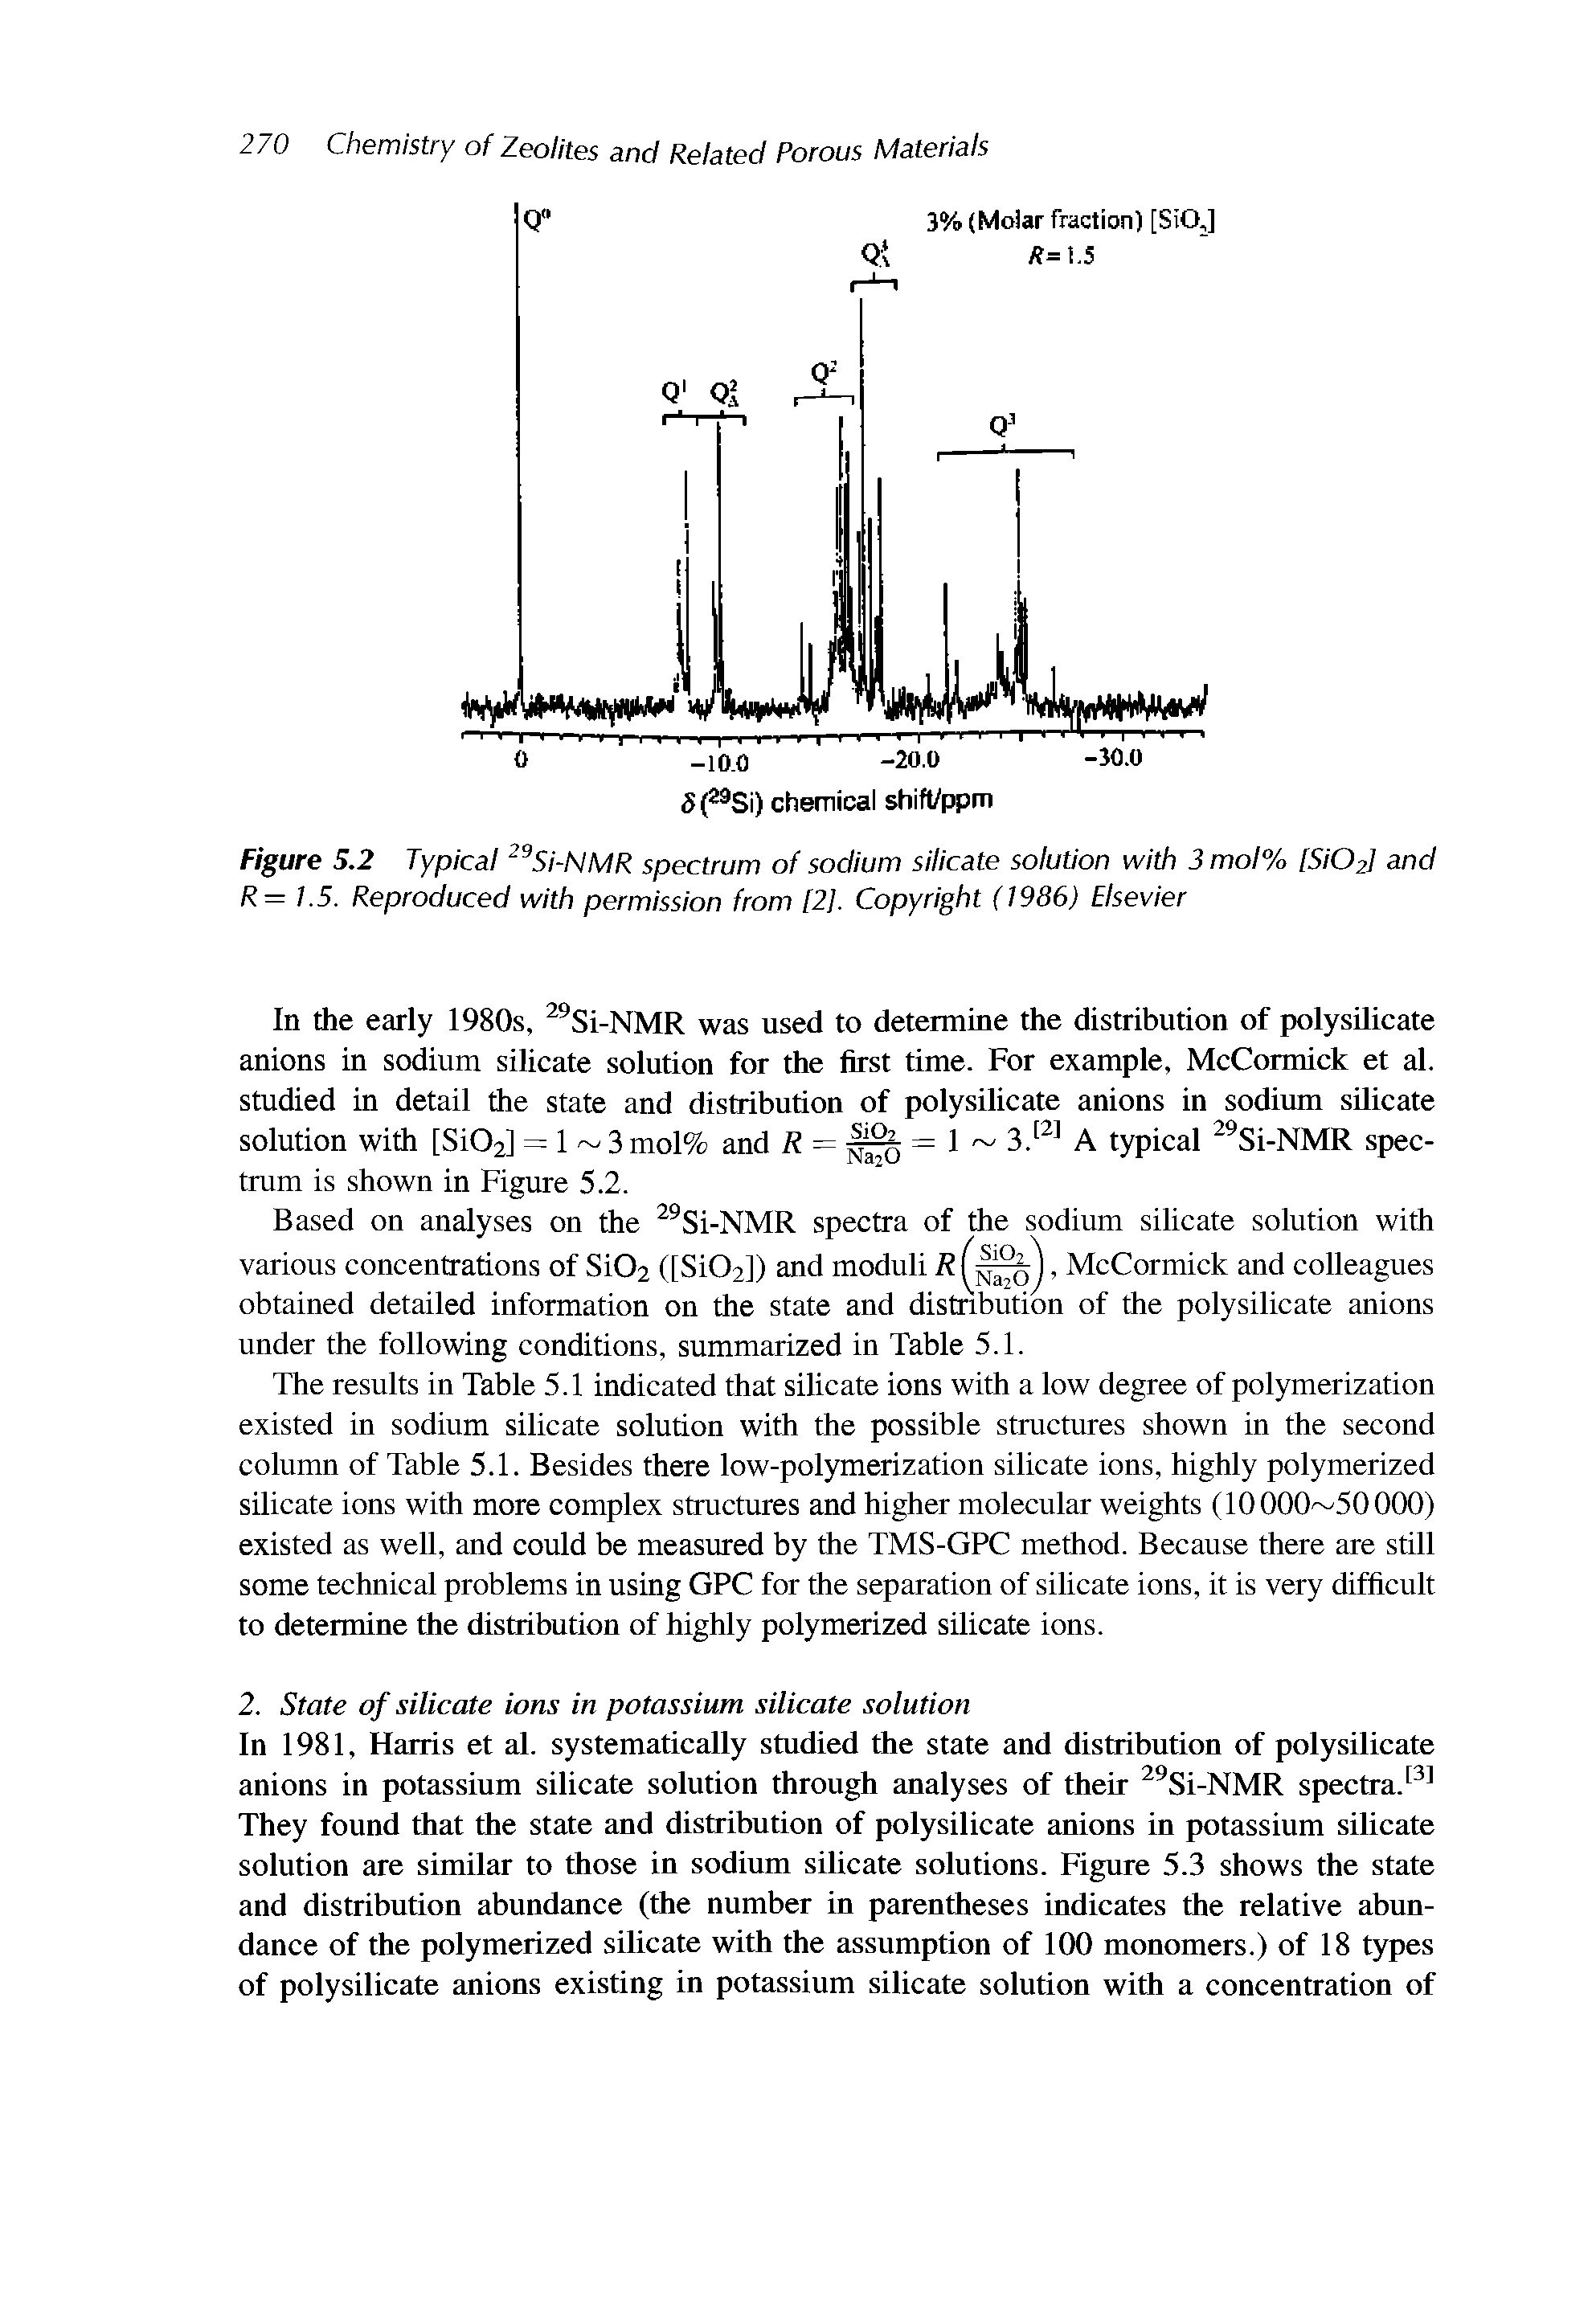 Figure 5.2 Typical 29Si-NMR spectrum of sodium silicate solution with 3 mol% [Si02] and R= 1.5. Reproduced with permission from [2], Copyright (1986) Elsevier...